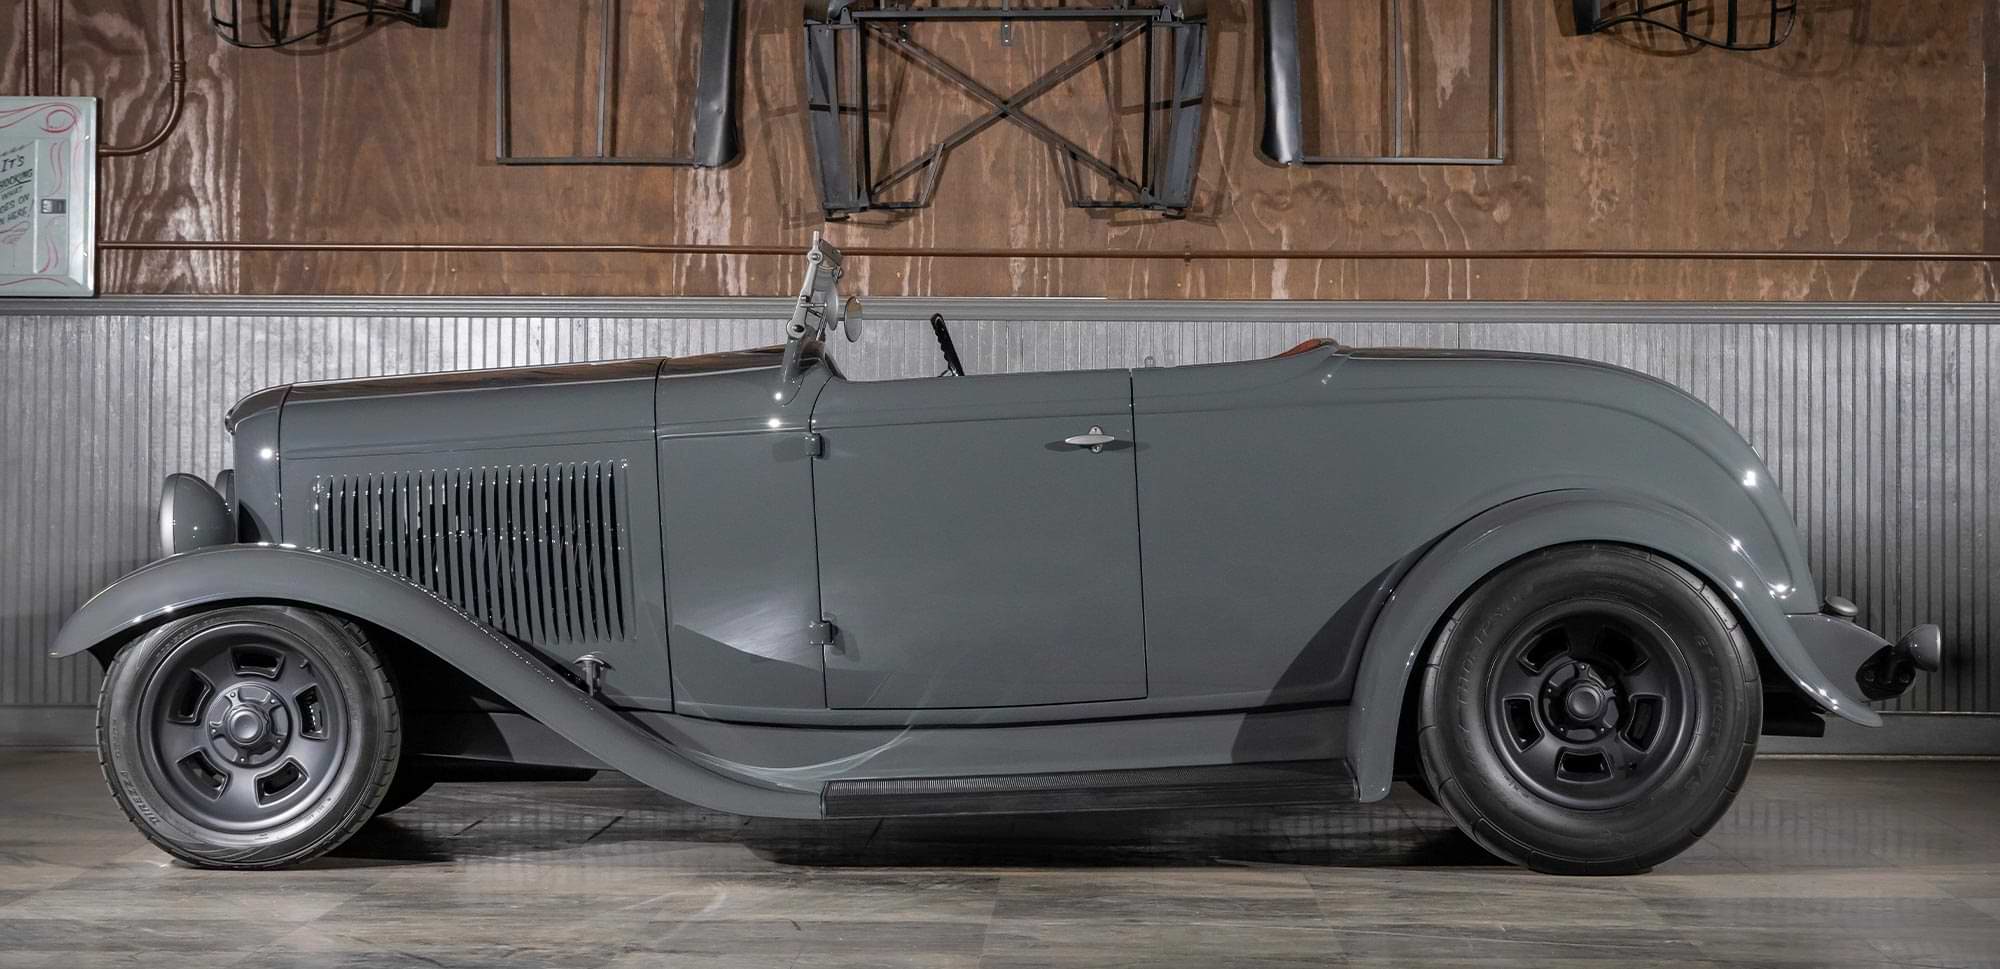 drivers side profile of the ’32 Ford roadster